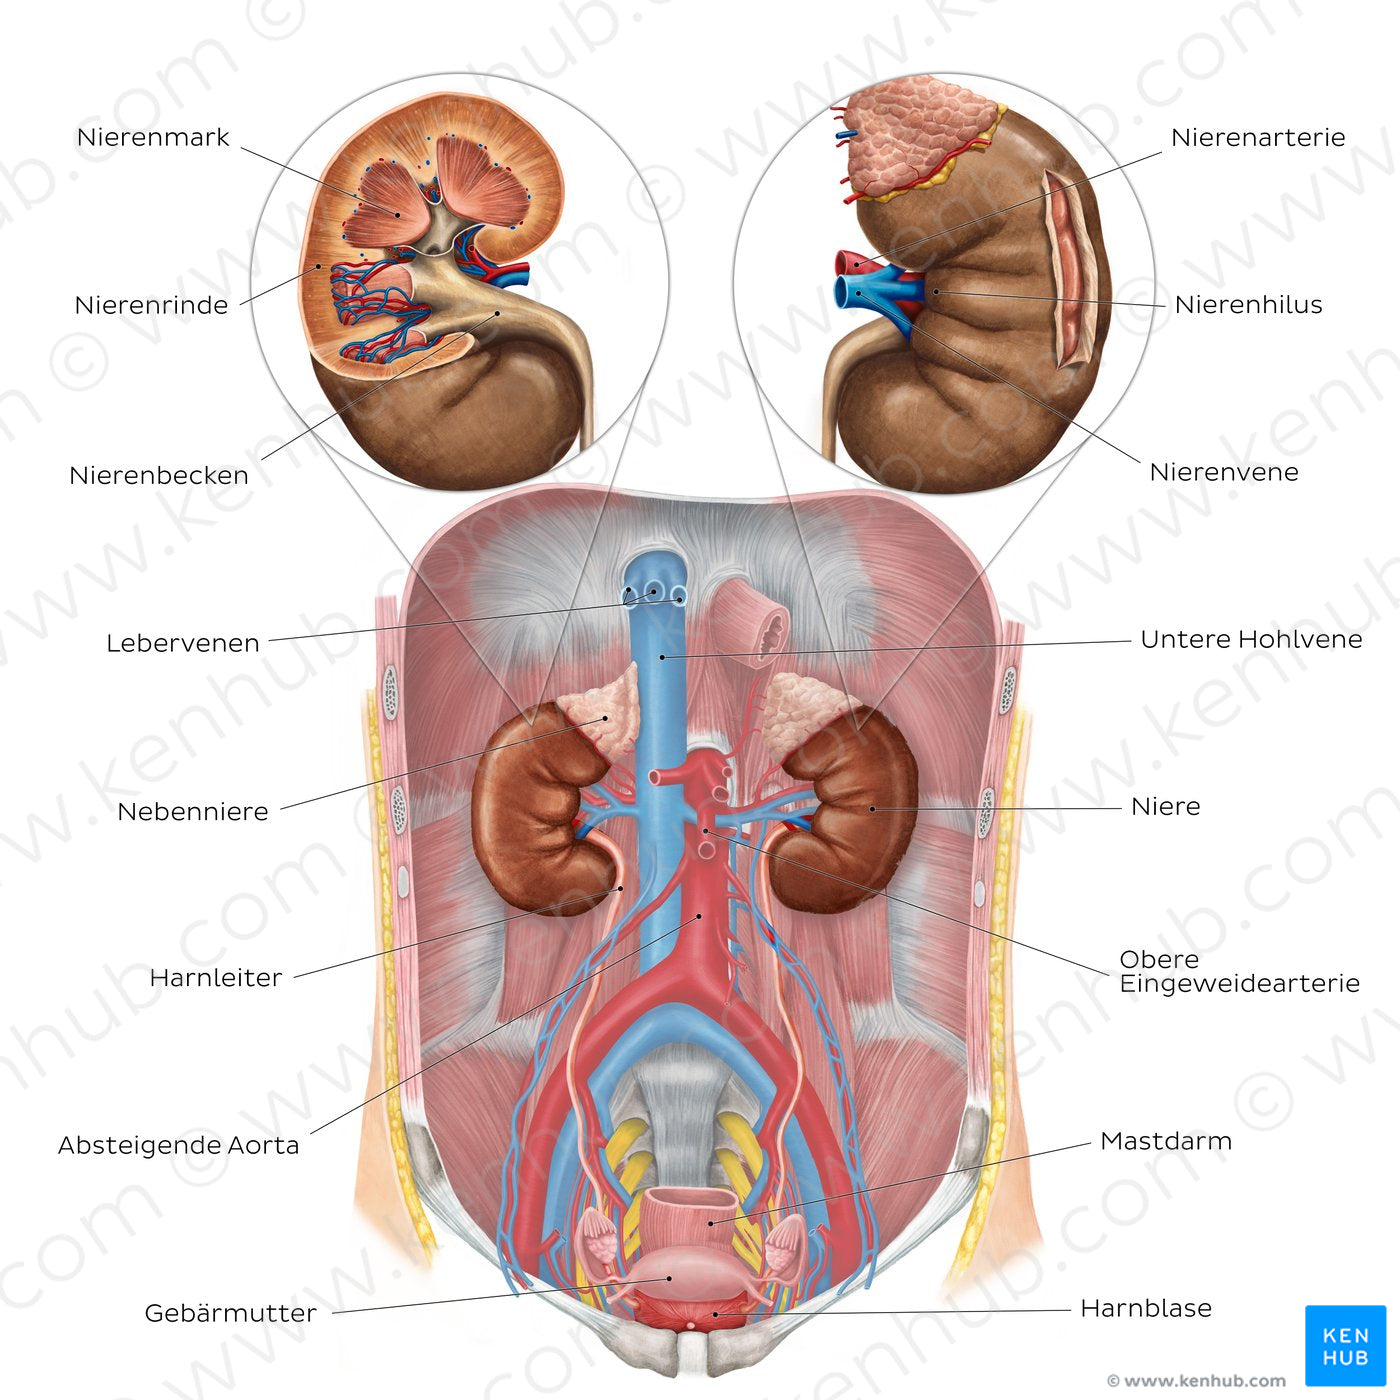 Urinary system - Overview (German)